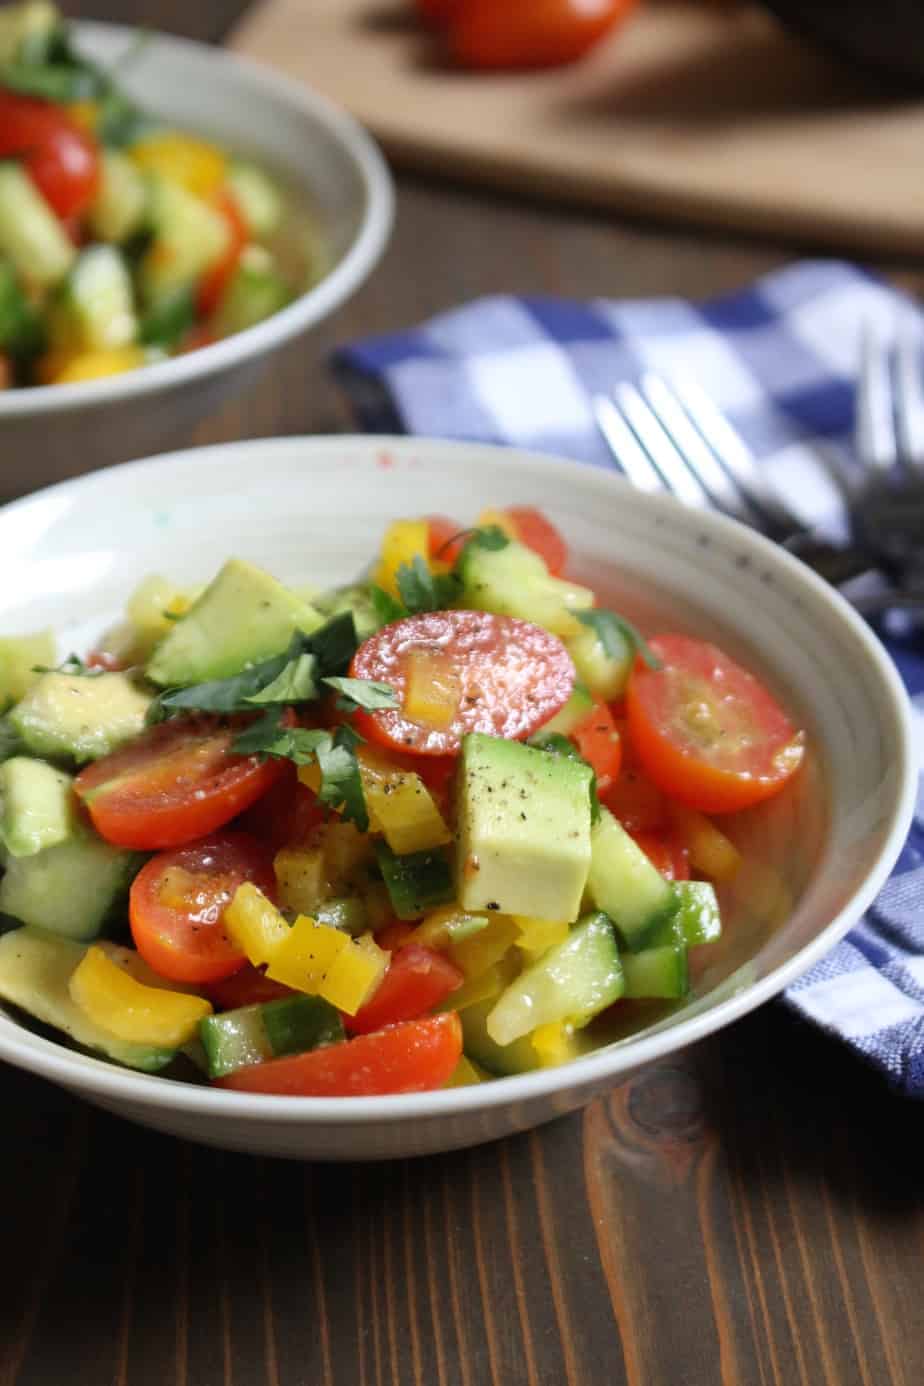 Tomatoes, Cucumbers, Avocados, Bell Pepper Salad | Frugal Nutrition #whole30